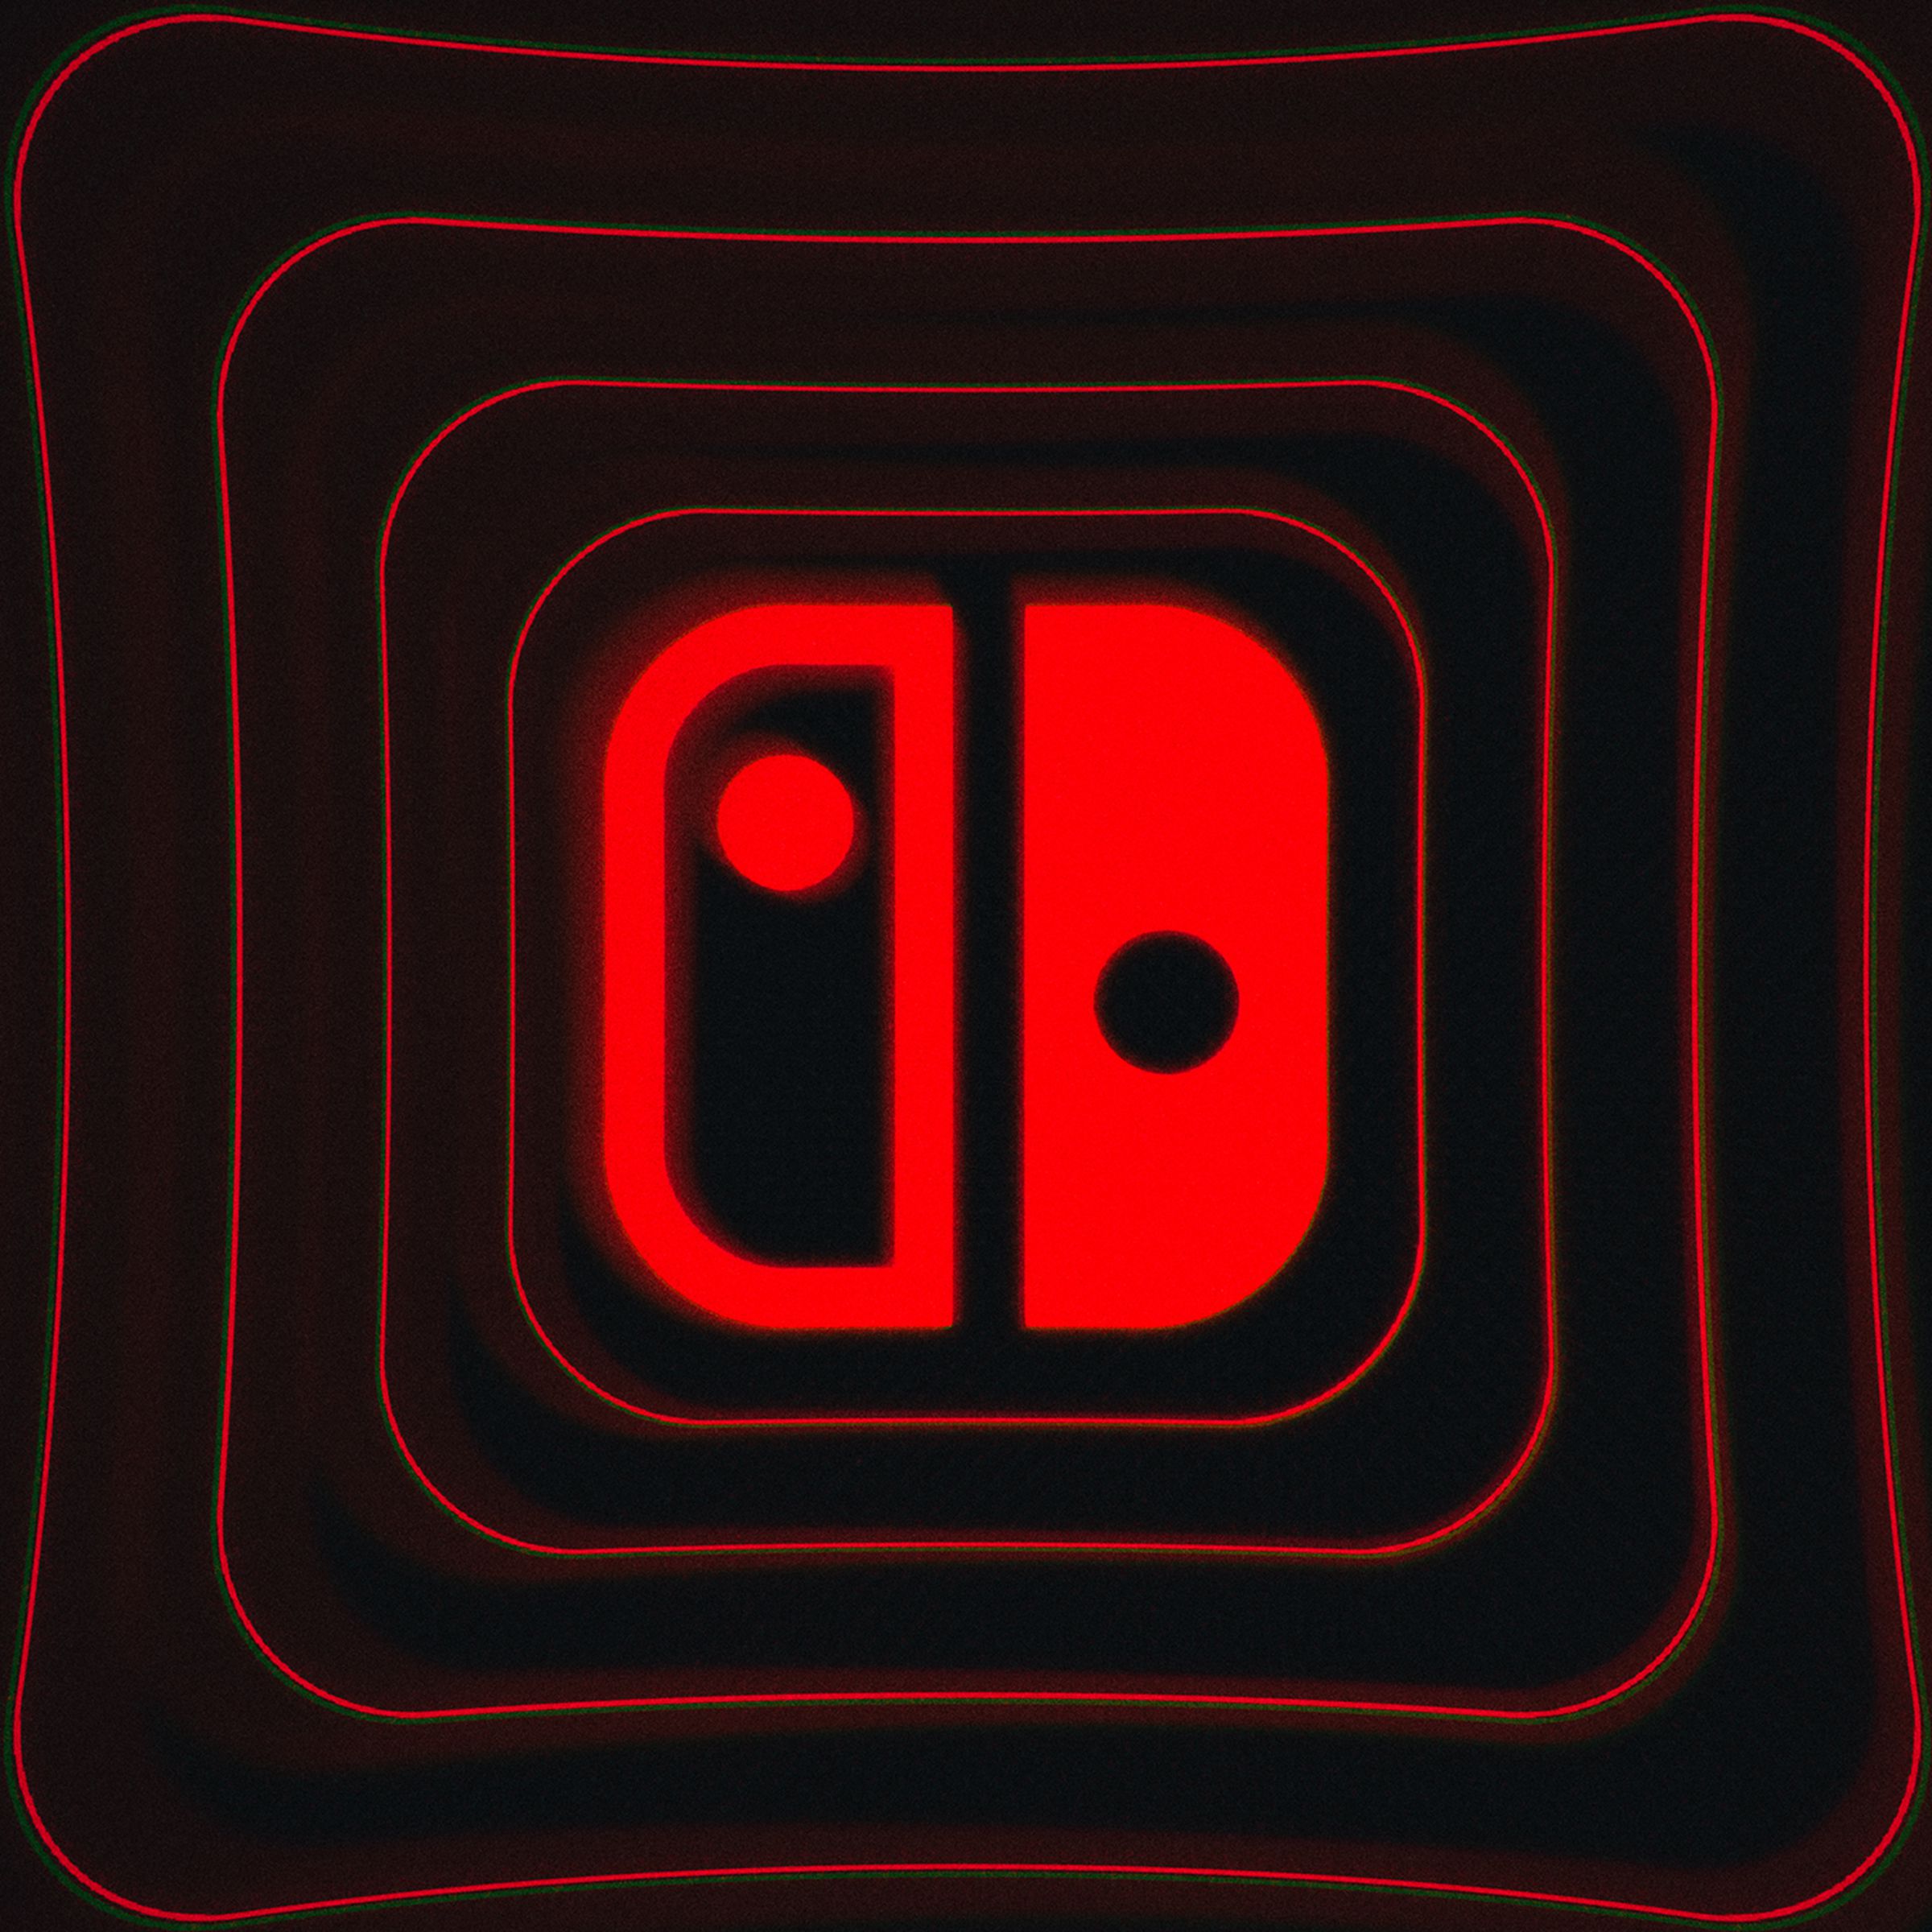 The Nintendo Switch logo on a black background with waves of thin red concentric rounded squares around it.